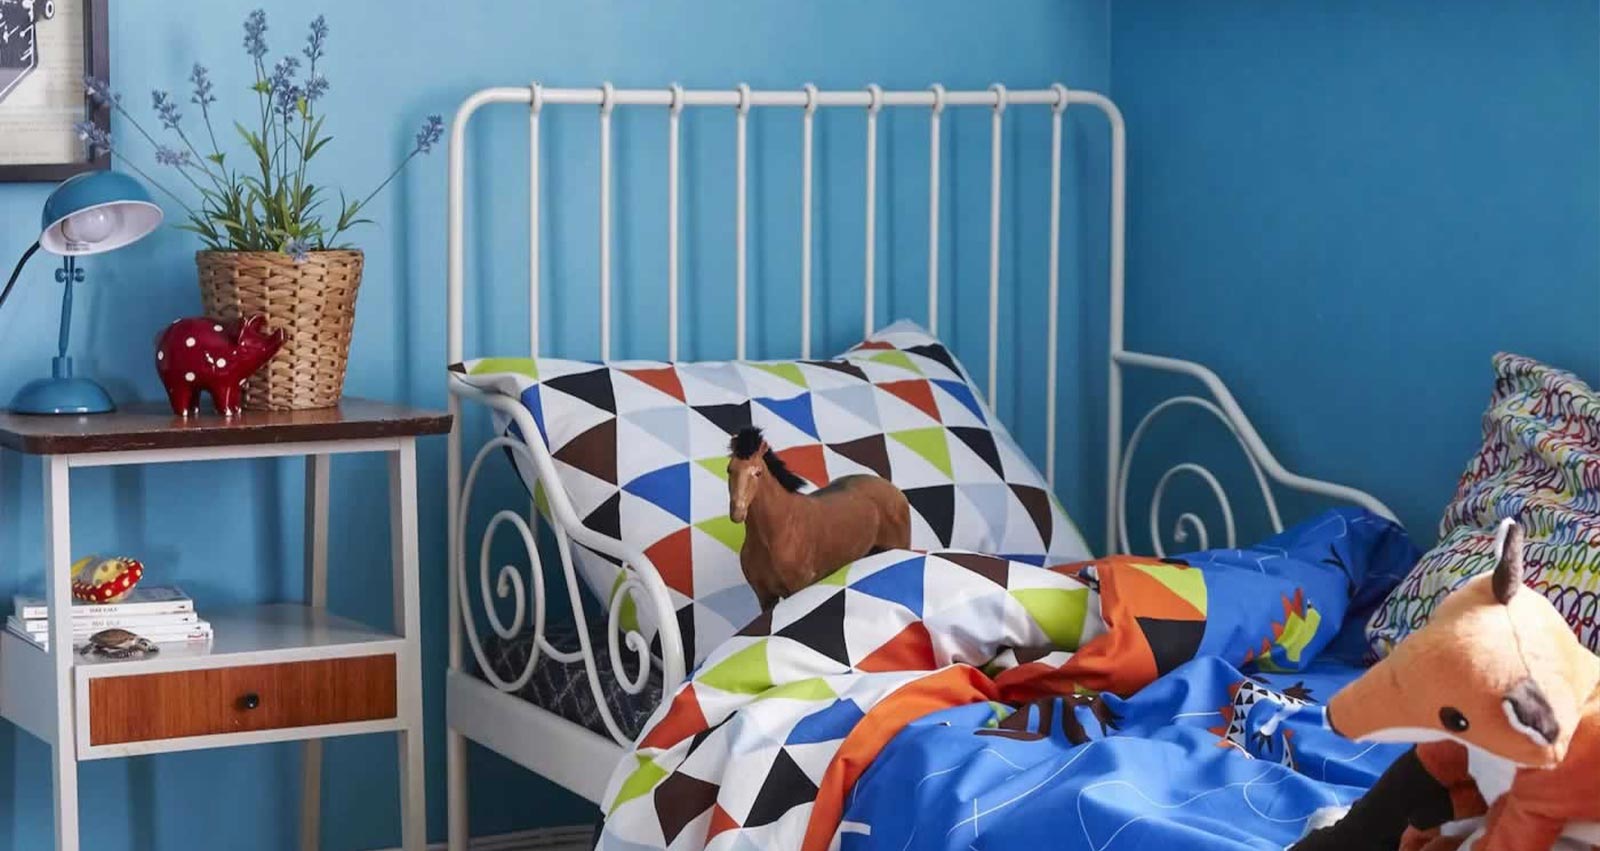 IKEA-A kids room to inspire young imaginations 01y